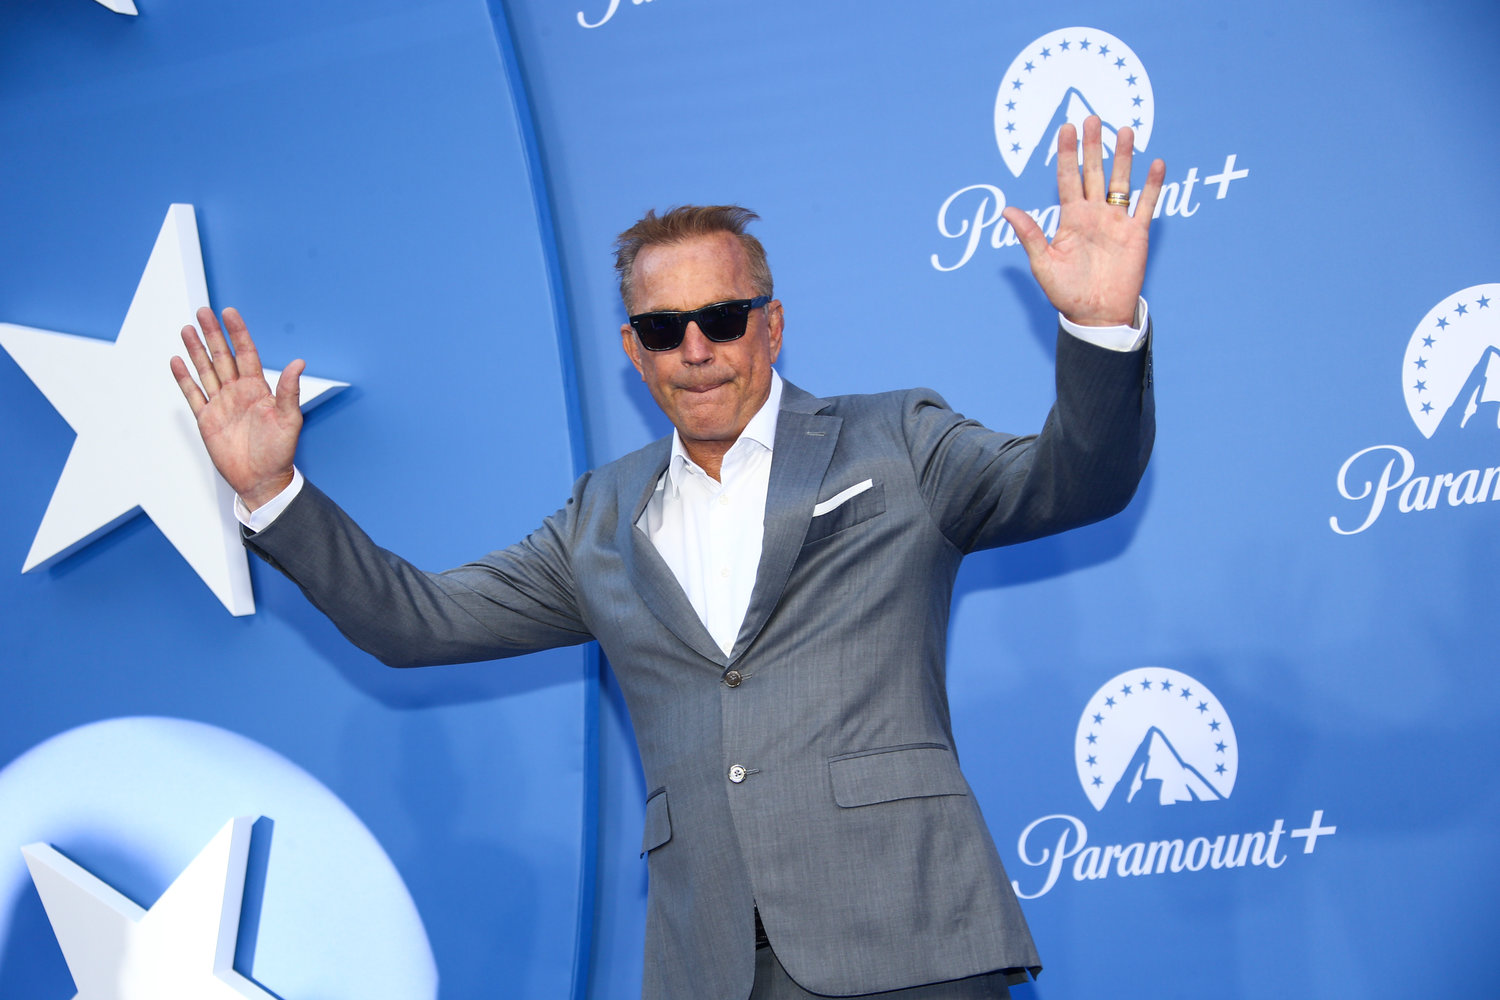 Kevin Costner greets the press as he arrives for the UK launch of the streaming site Paramount +, in London.